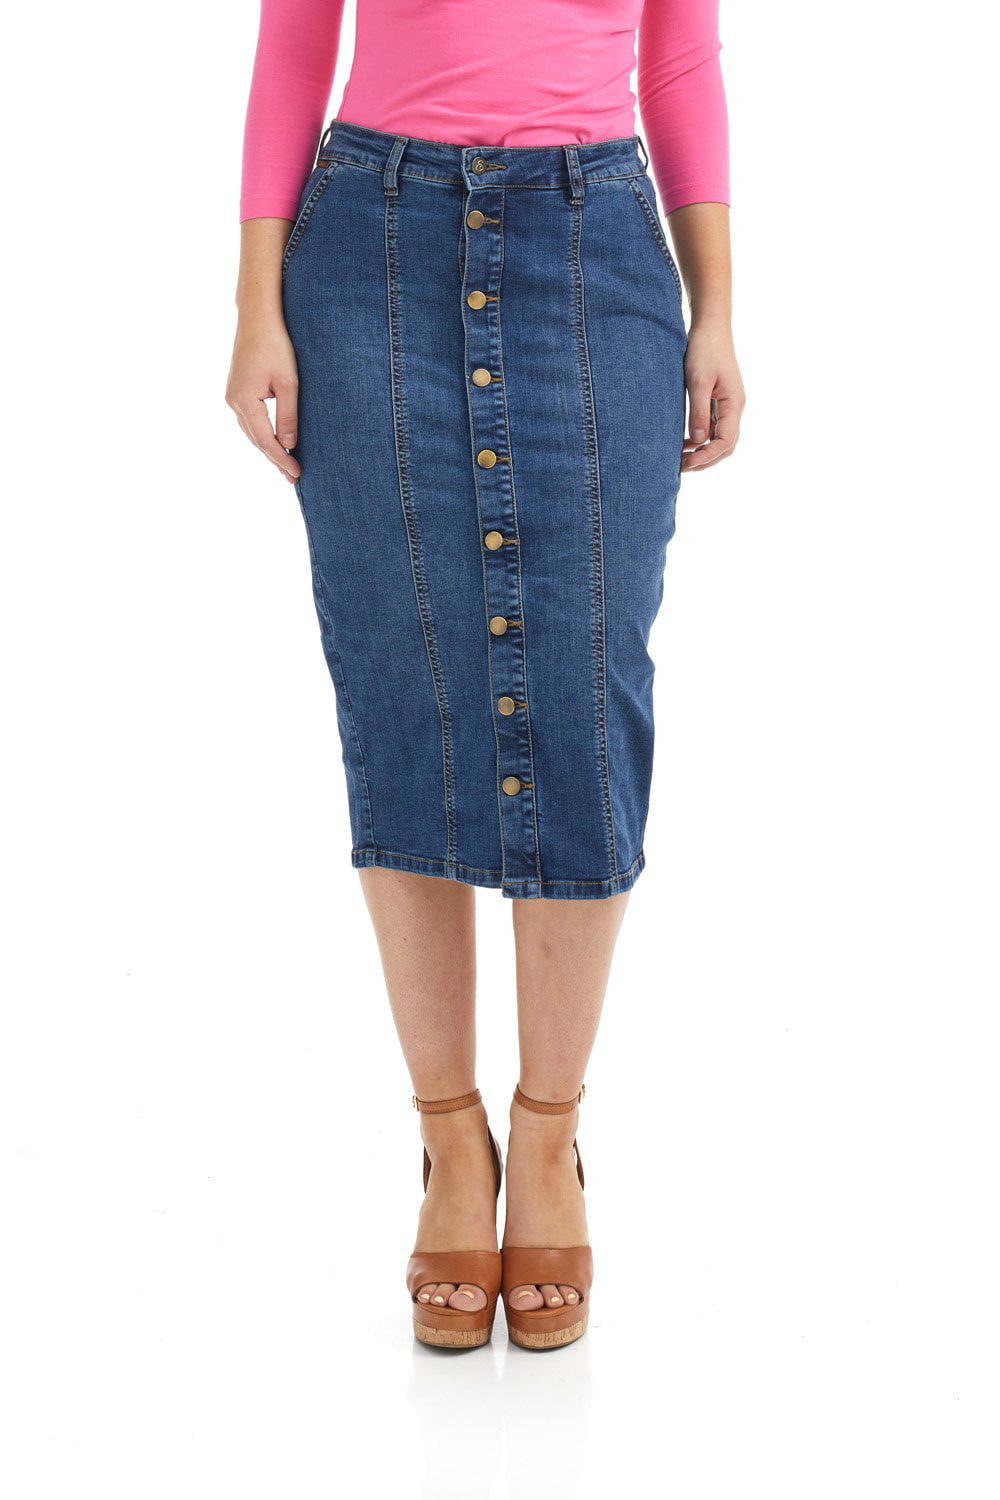 denim skirt with buttons down the front